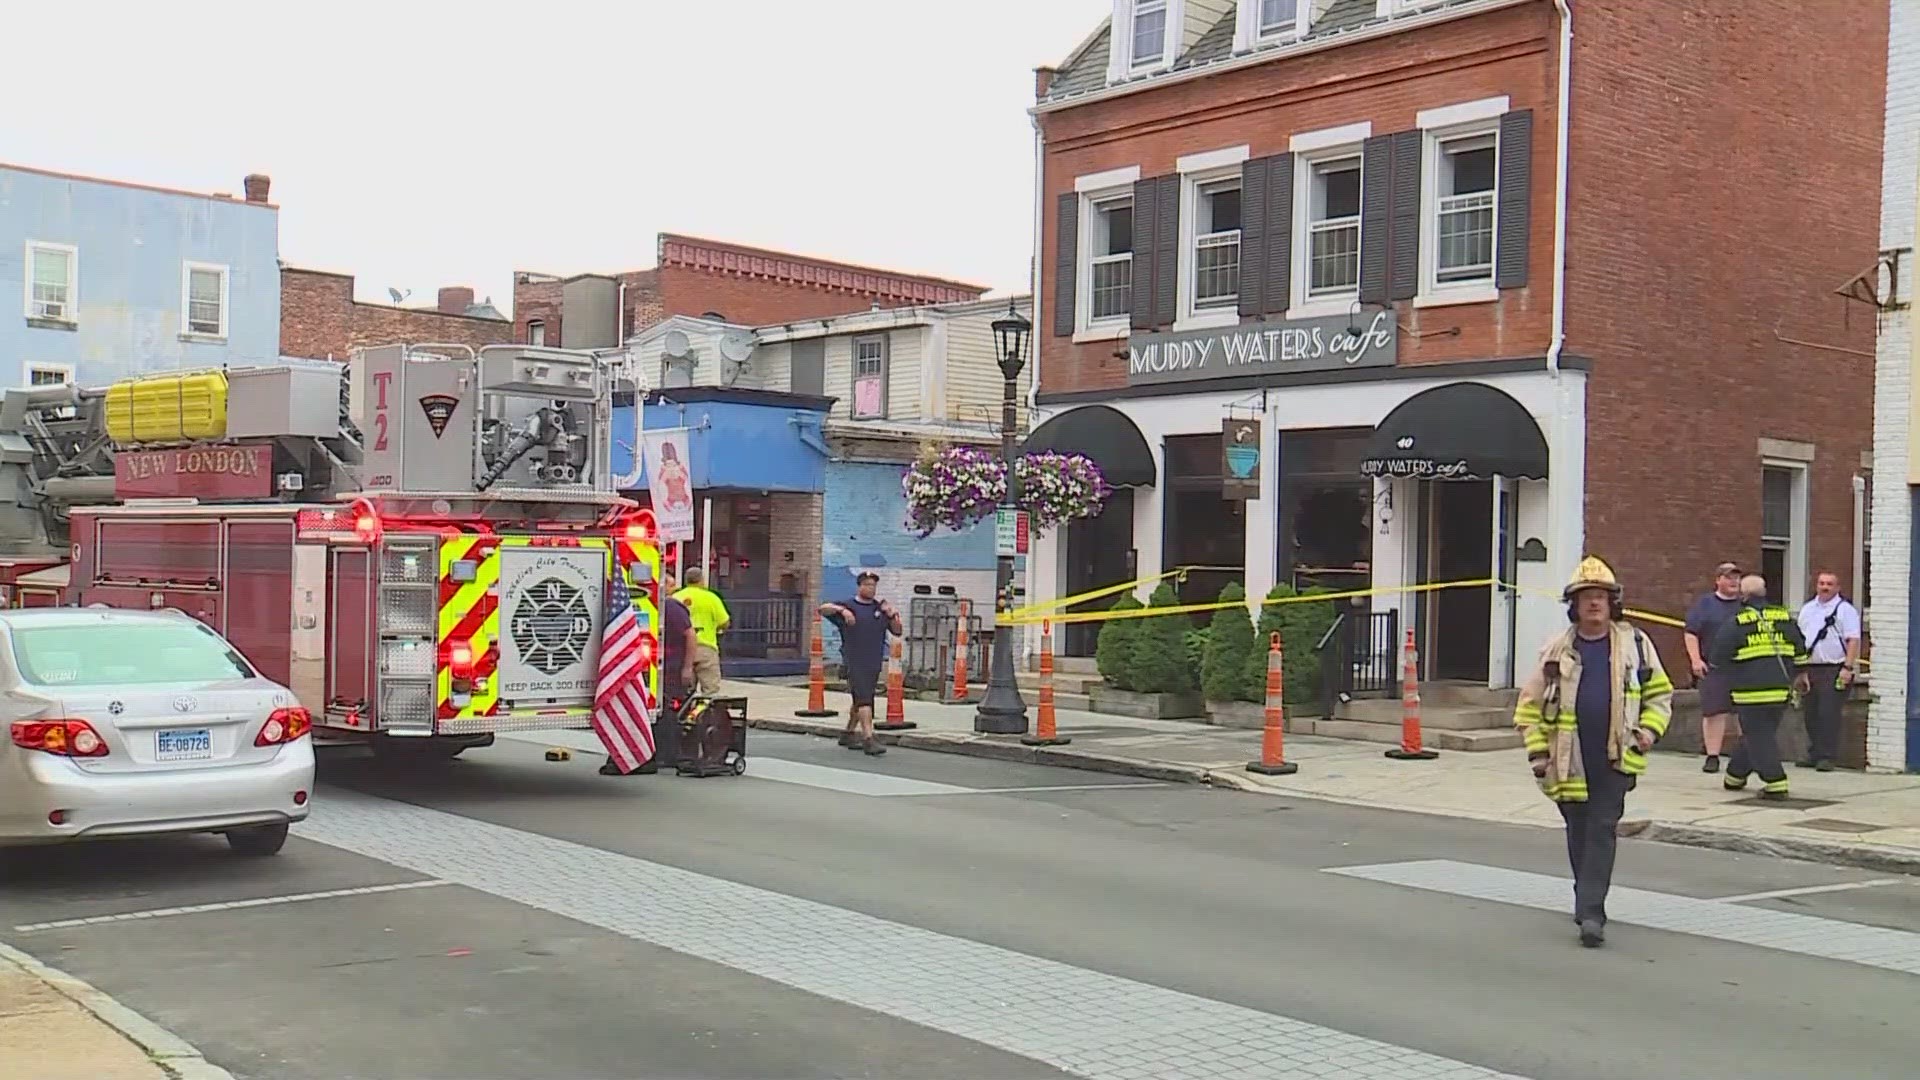 Muddy Waters Cafe on Bank Street in New London is closed after a fire started in its basement.